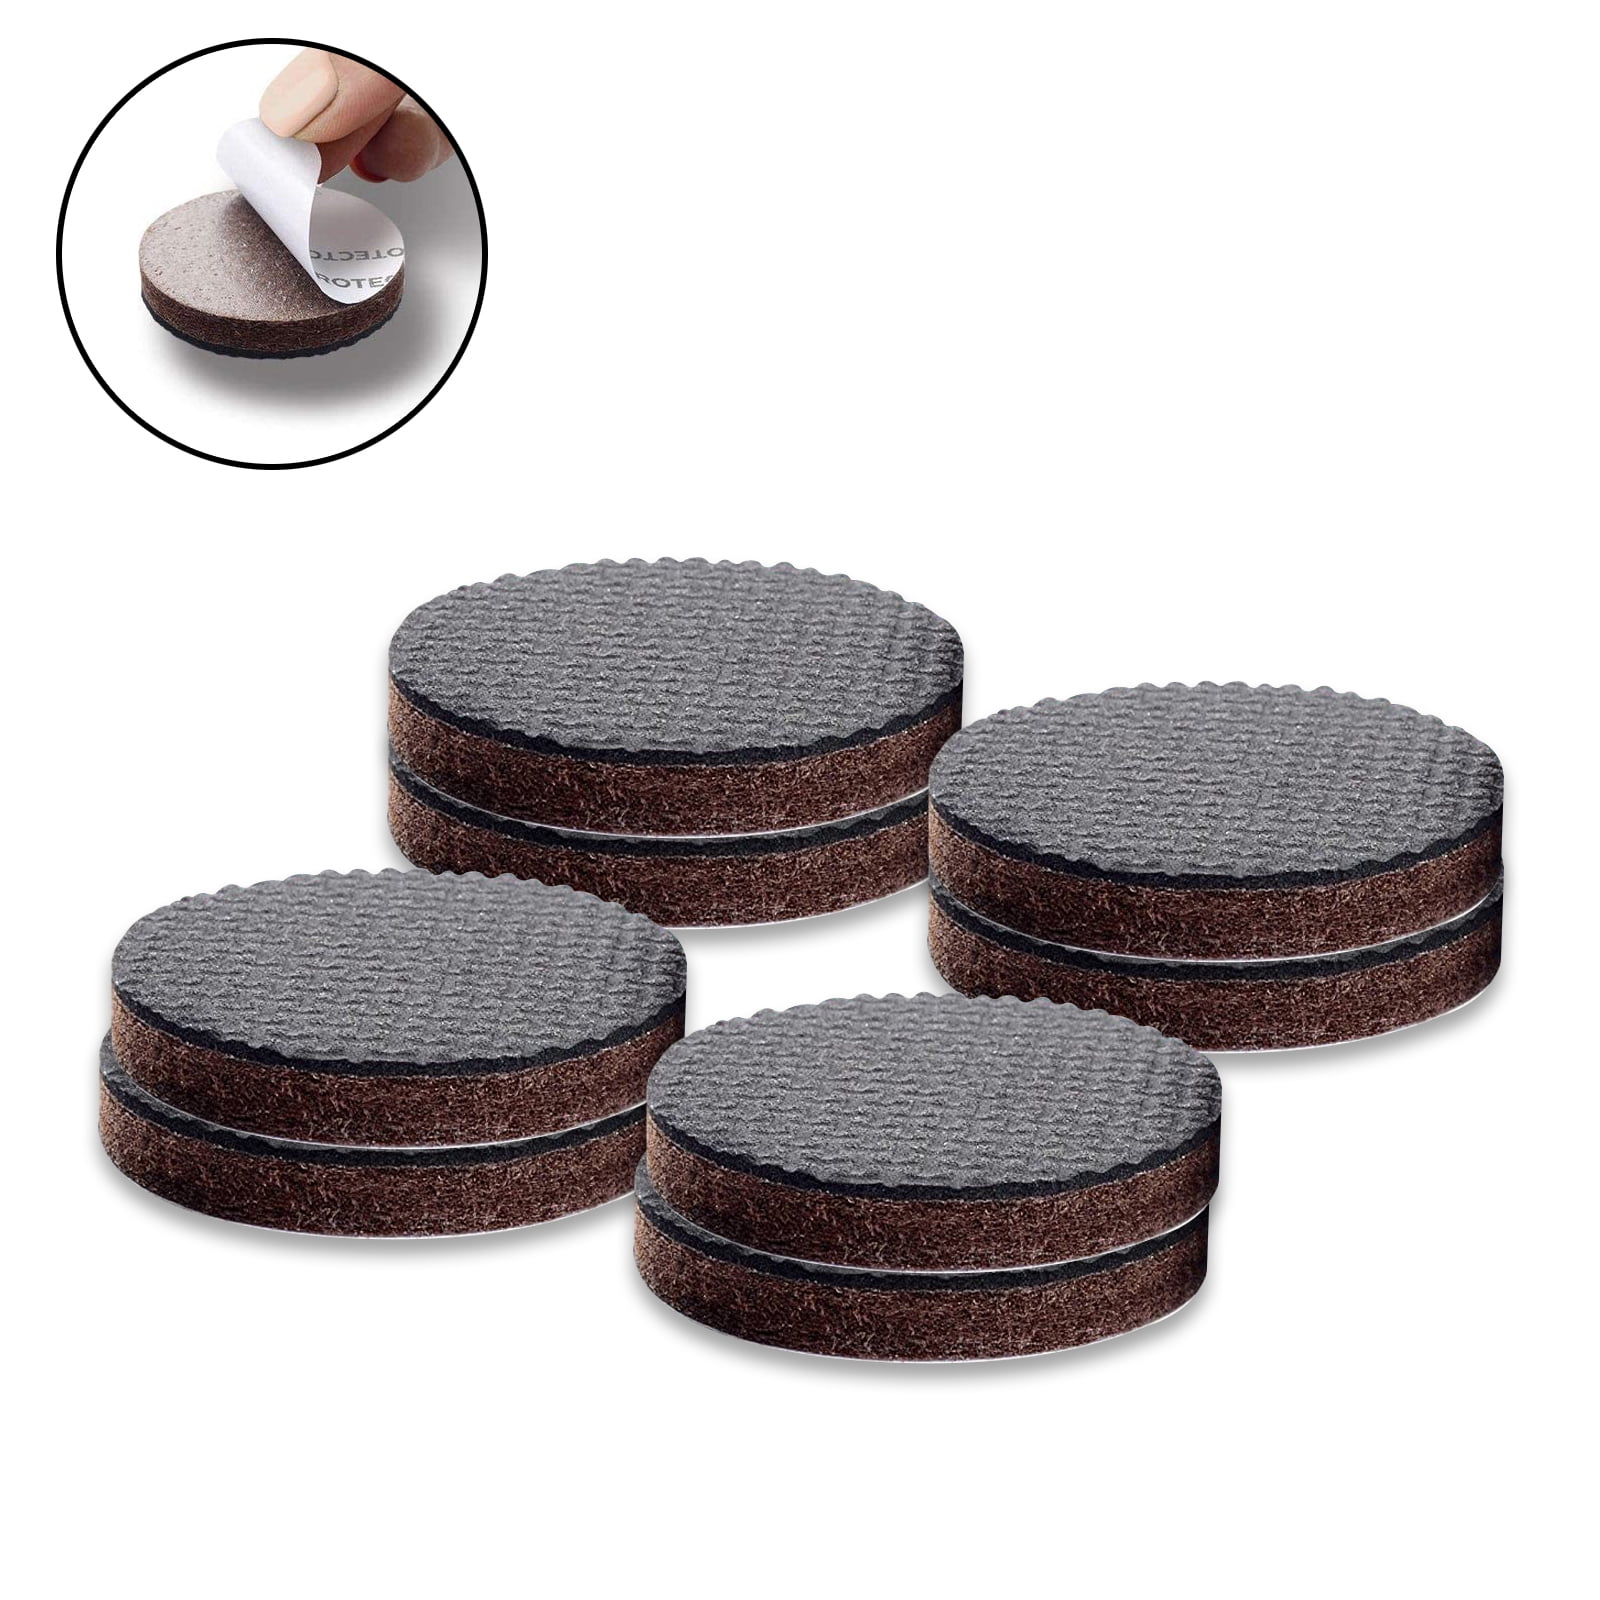 Non-Slip Furniture Pads,Solid Round Rubber Feet,12PCS 2 inch,20PCS  1,Stoppers,Self Adhesive Anti-Sliding Grippers for Bed,Couch,Table,Prevent